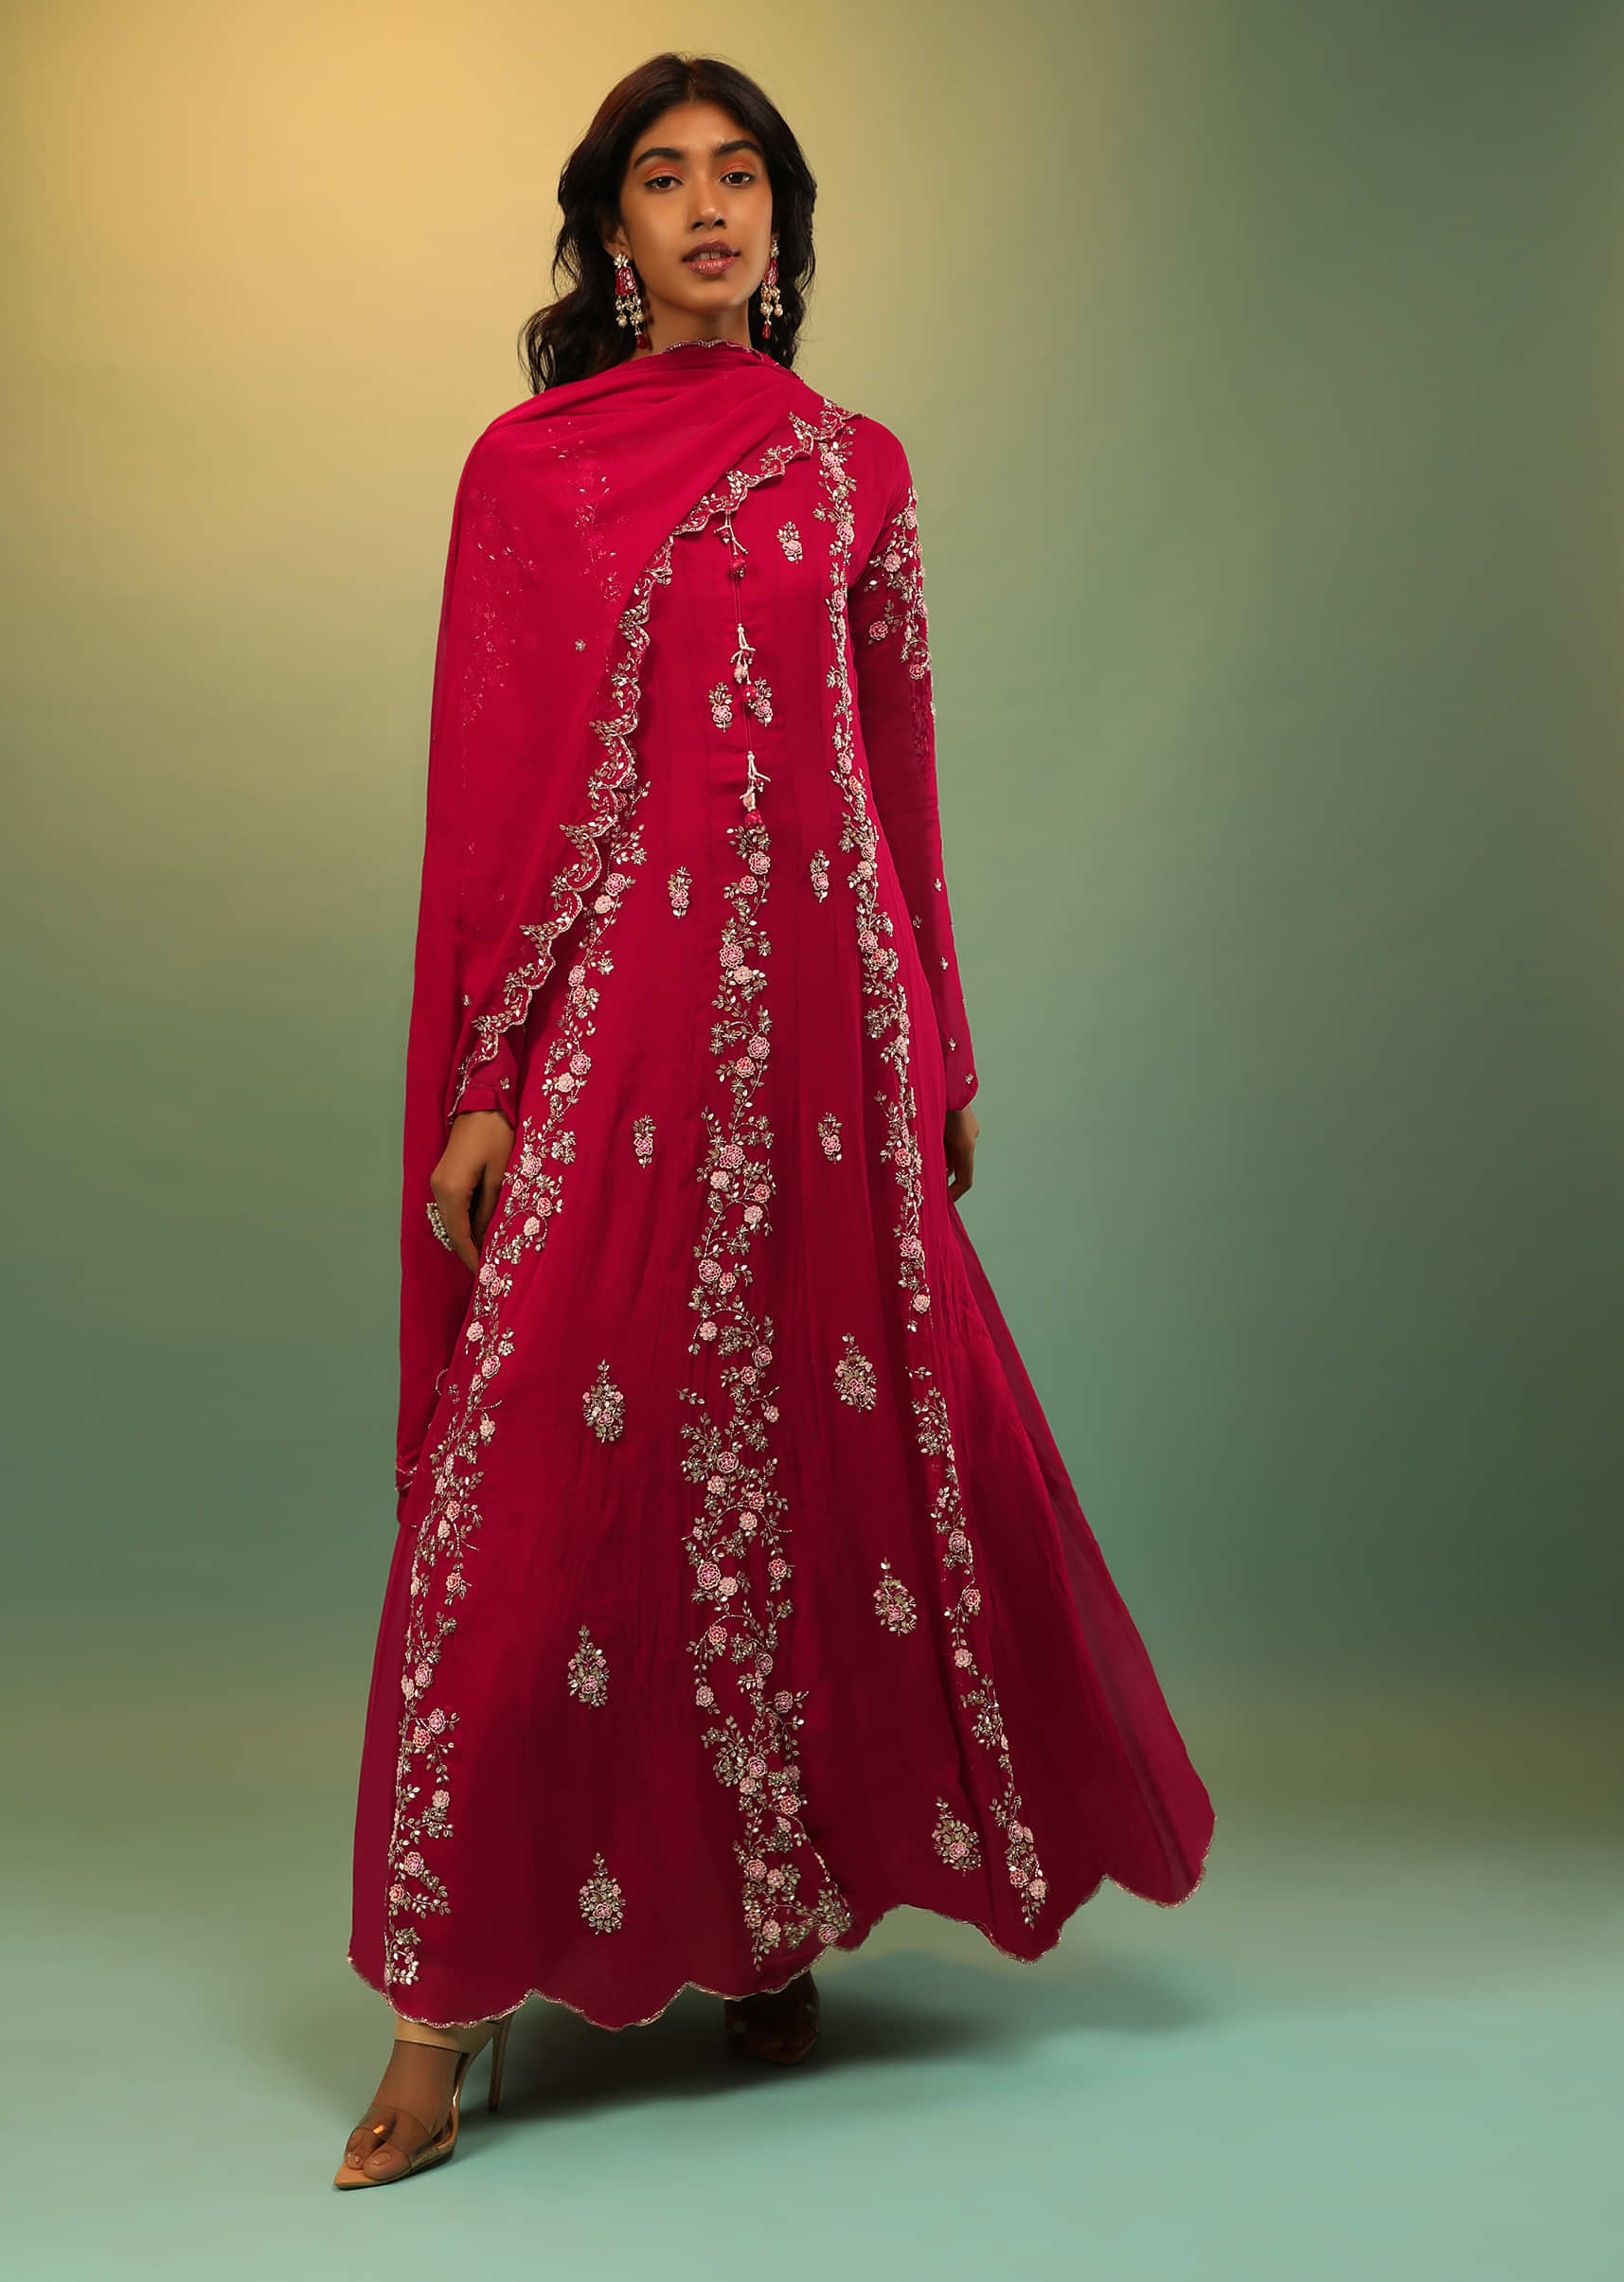 Scarlet Red Anarkali Suit In Georgette With Multi Colored Thread And Sequins Embroidered Floral Design On The Kalis  